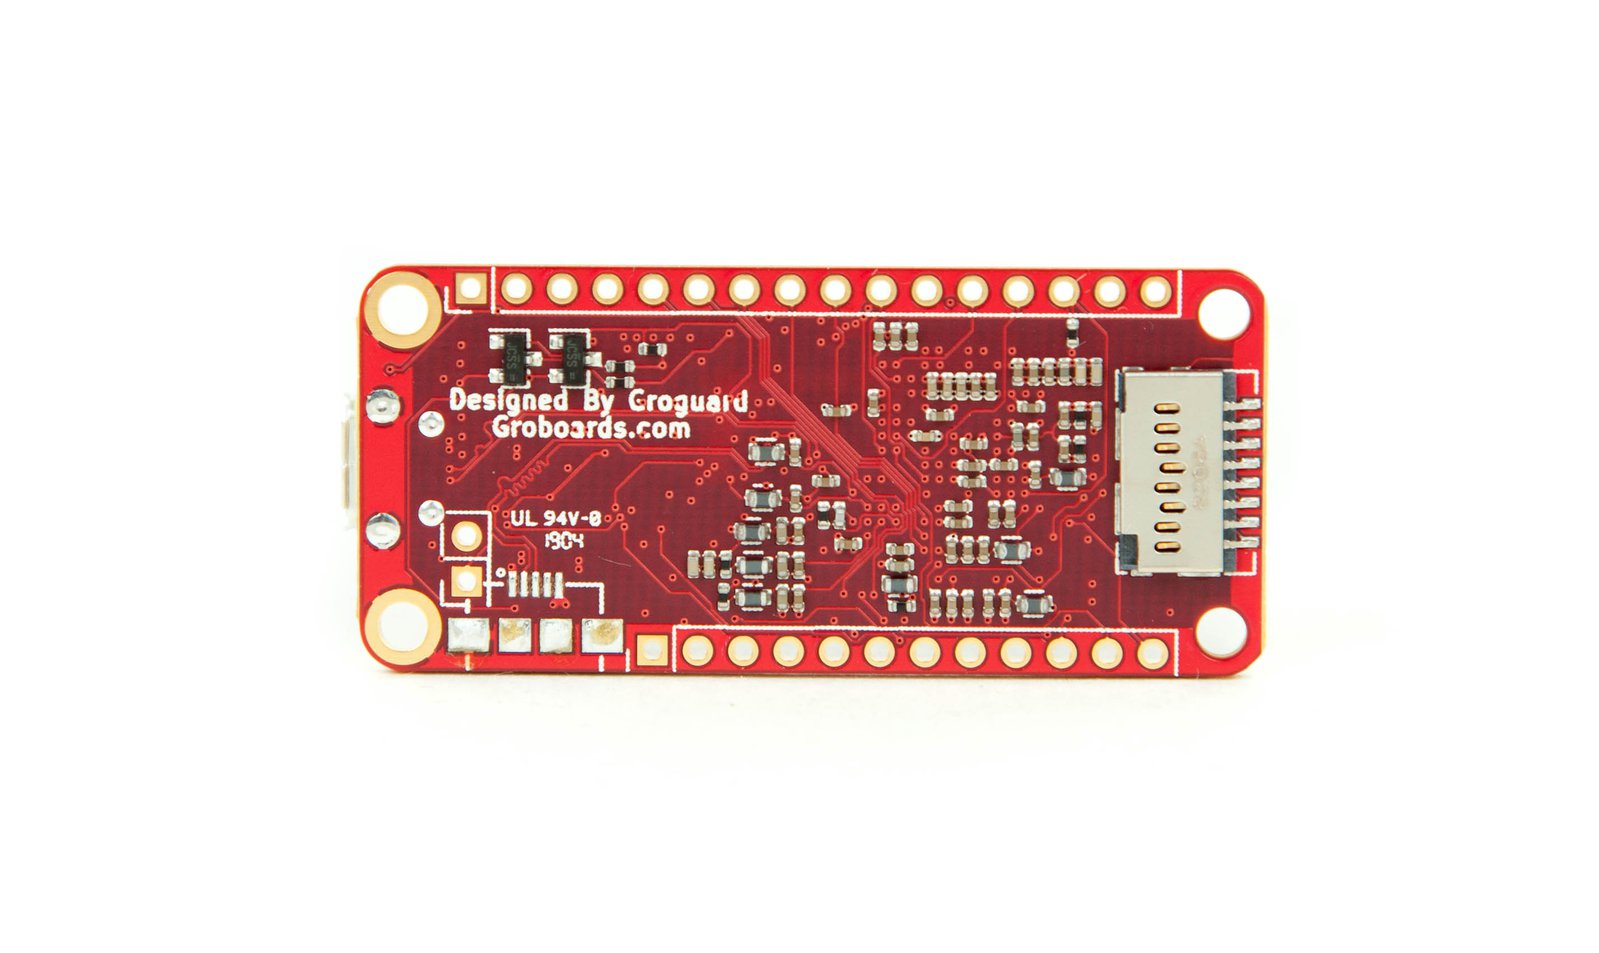 Single-board computer in the Adafruit Feather form factor